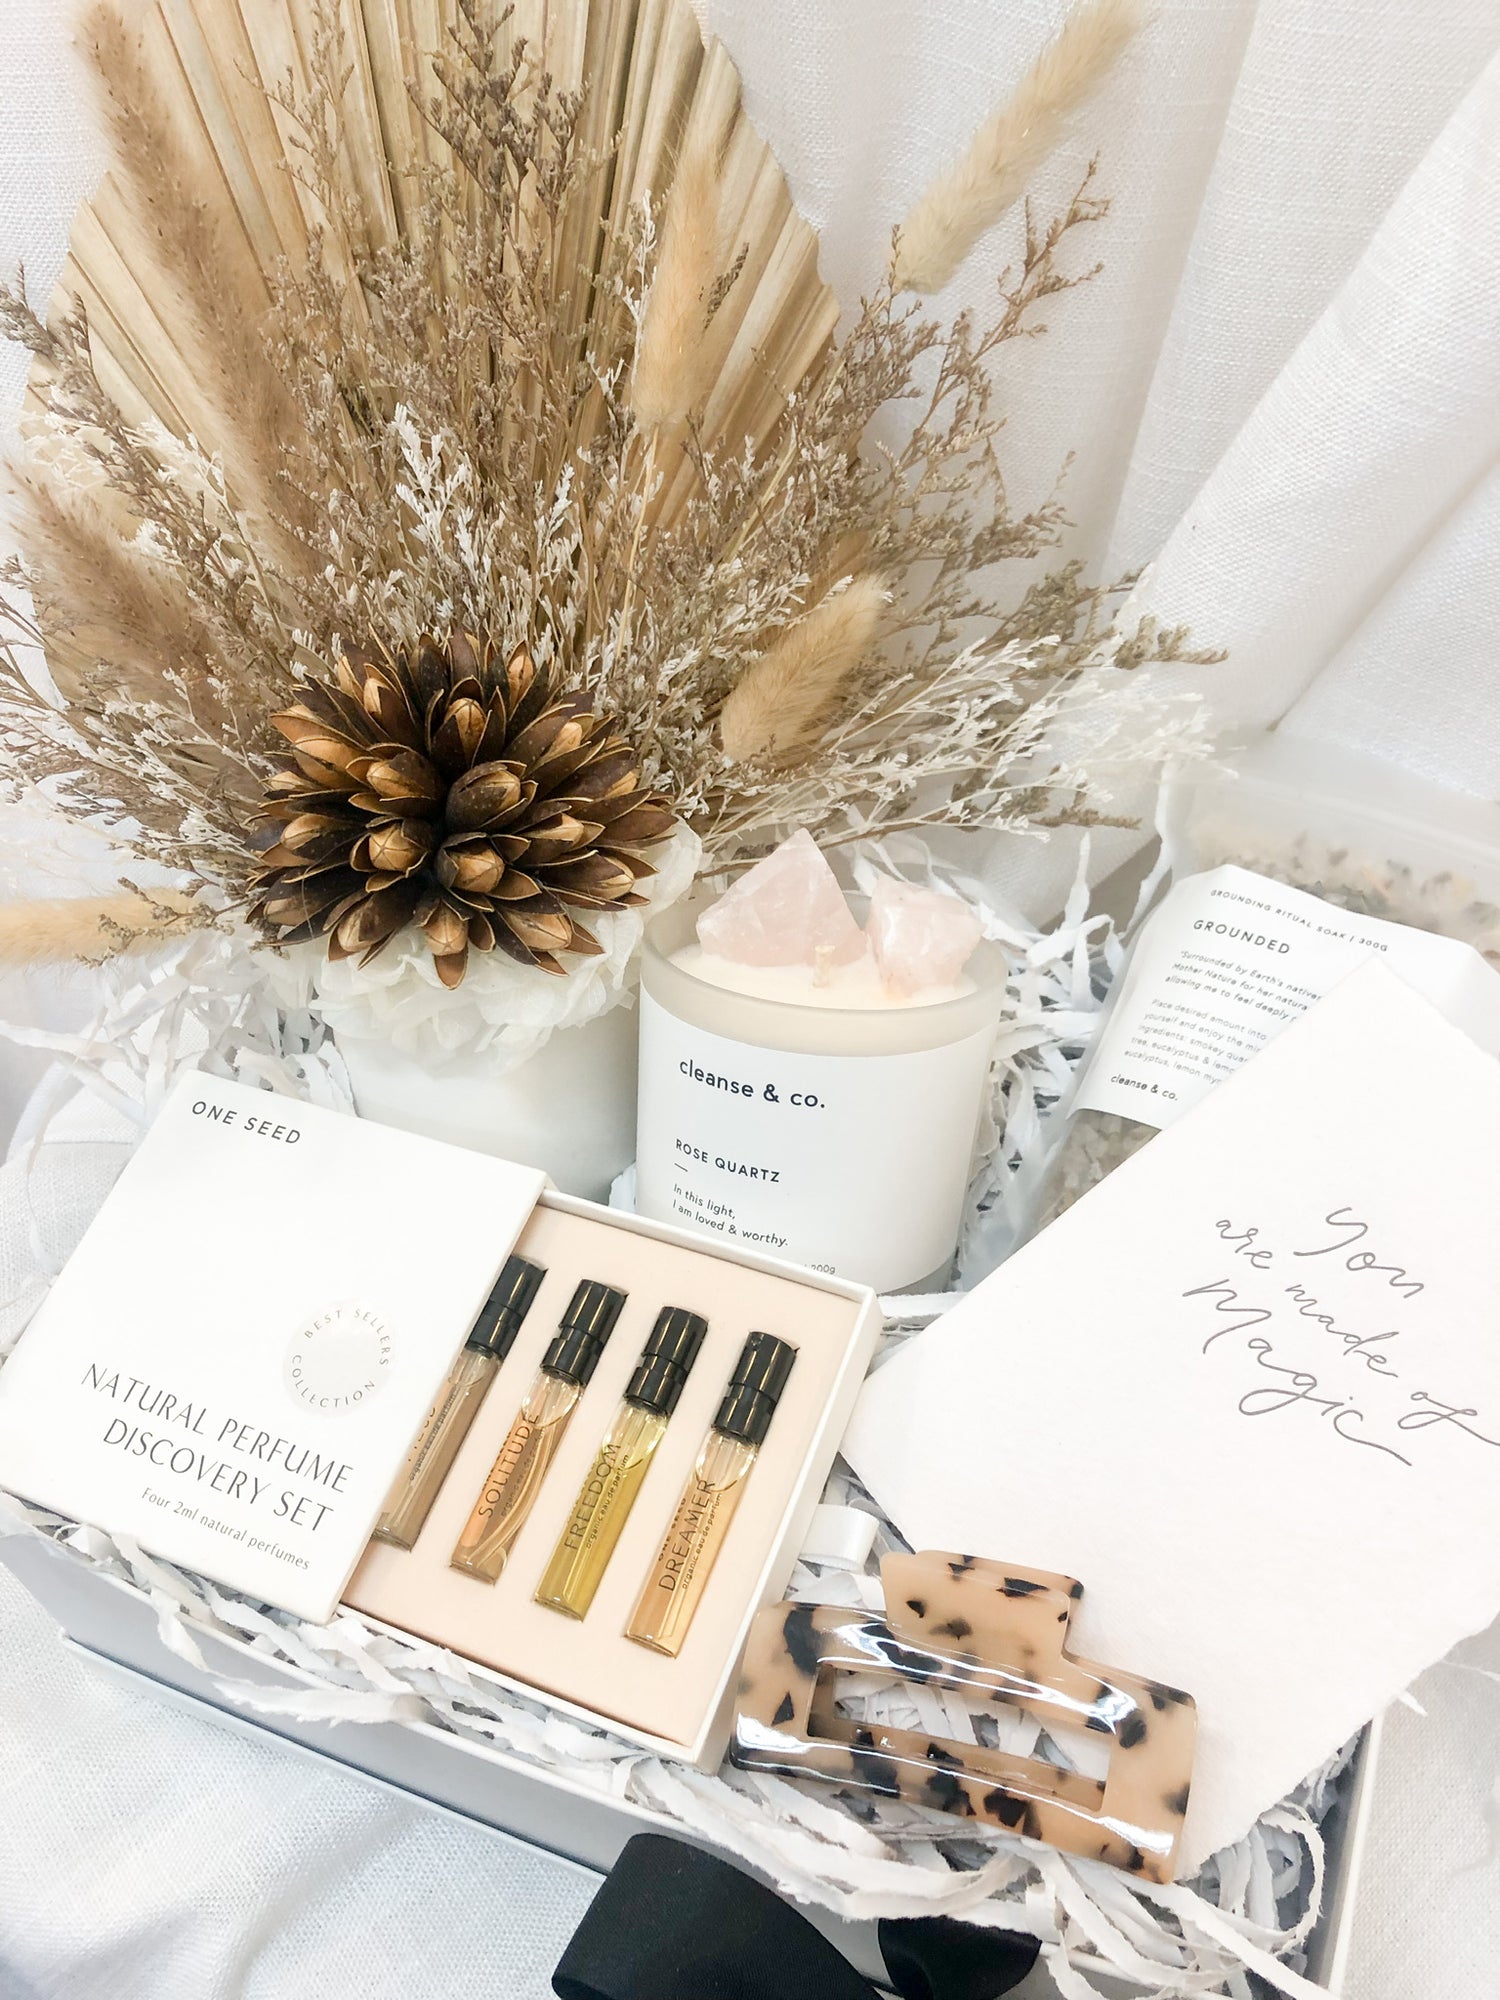 Build your own gift box including Dried Flower Arrangements, Cleanse & Co Crysal Candles, Organic Perfumes by One Seed. Delivered by Newcastle Dried Flower Co.